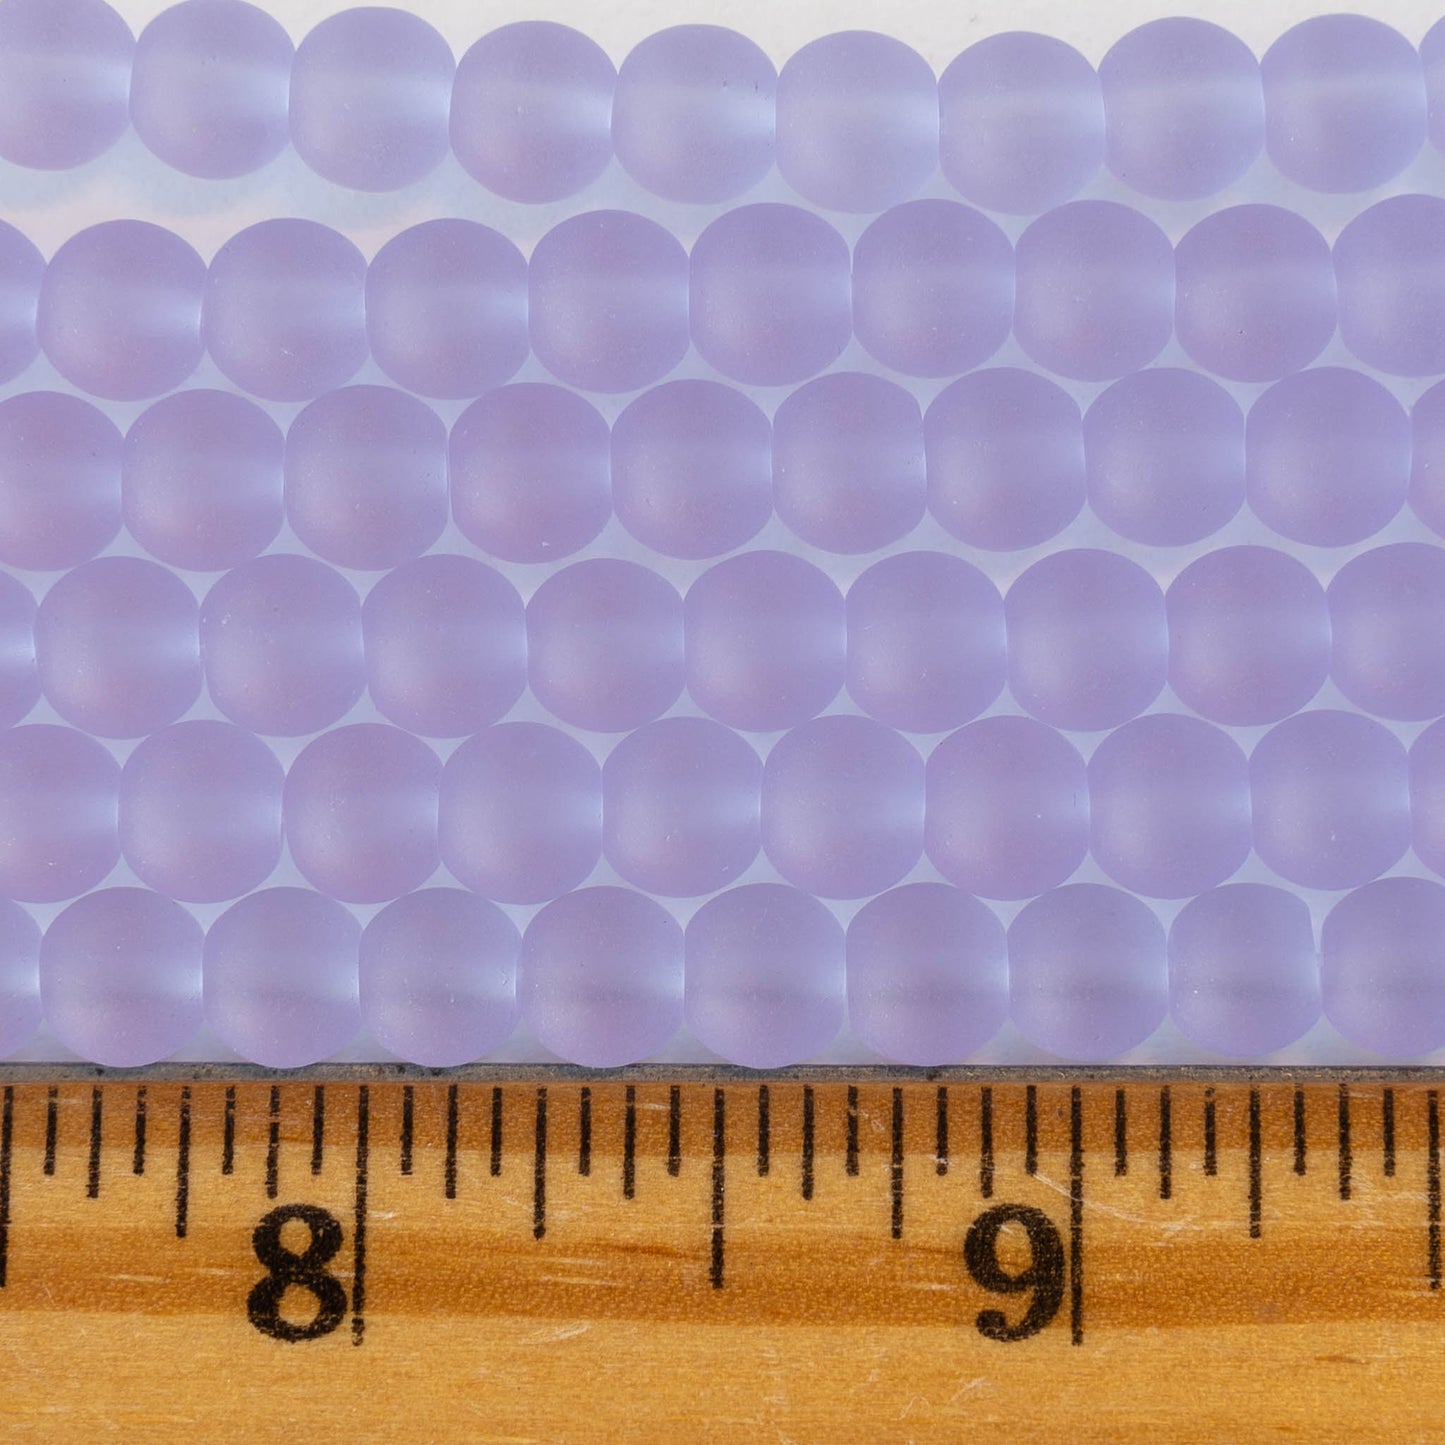 Load image into Gallery viewer, 6mm Frosted Glass Round Beads - Frosted Lavender - 16 Inches
